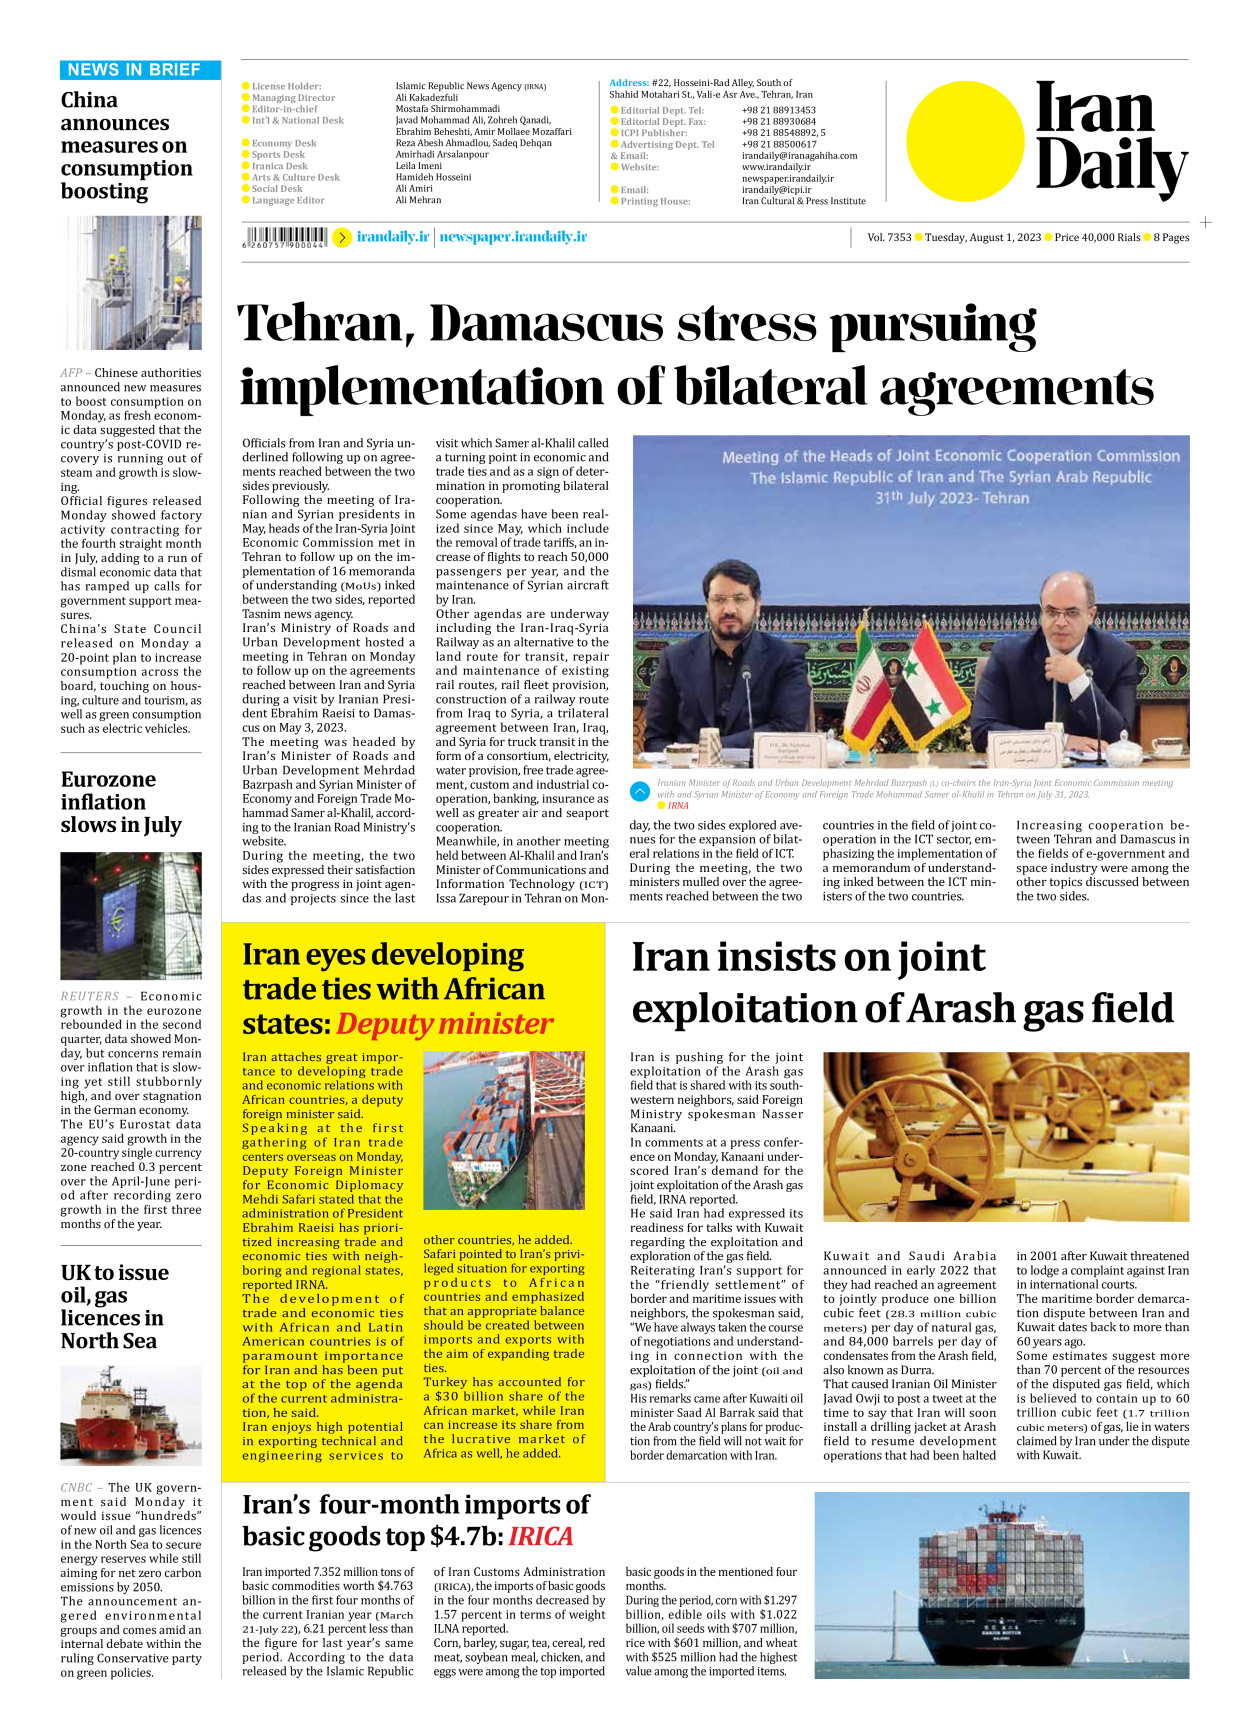 Iran Daily - Number Seven Thousand Three Hundred and Fifty Three - 01 August 2023 - Page 8